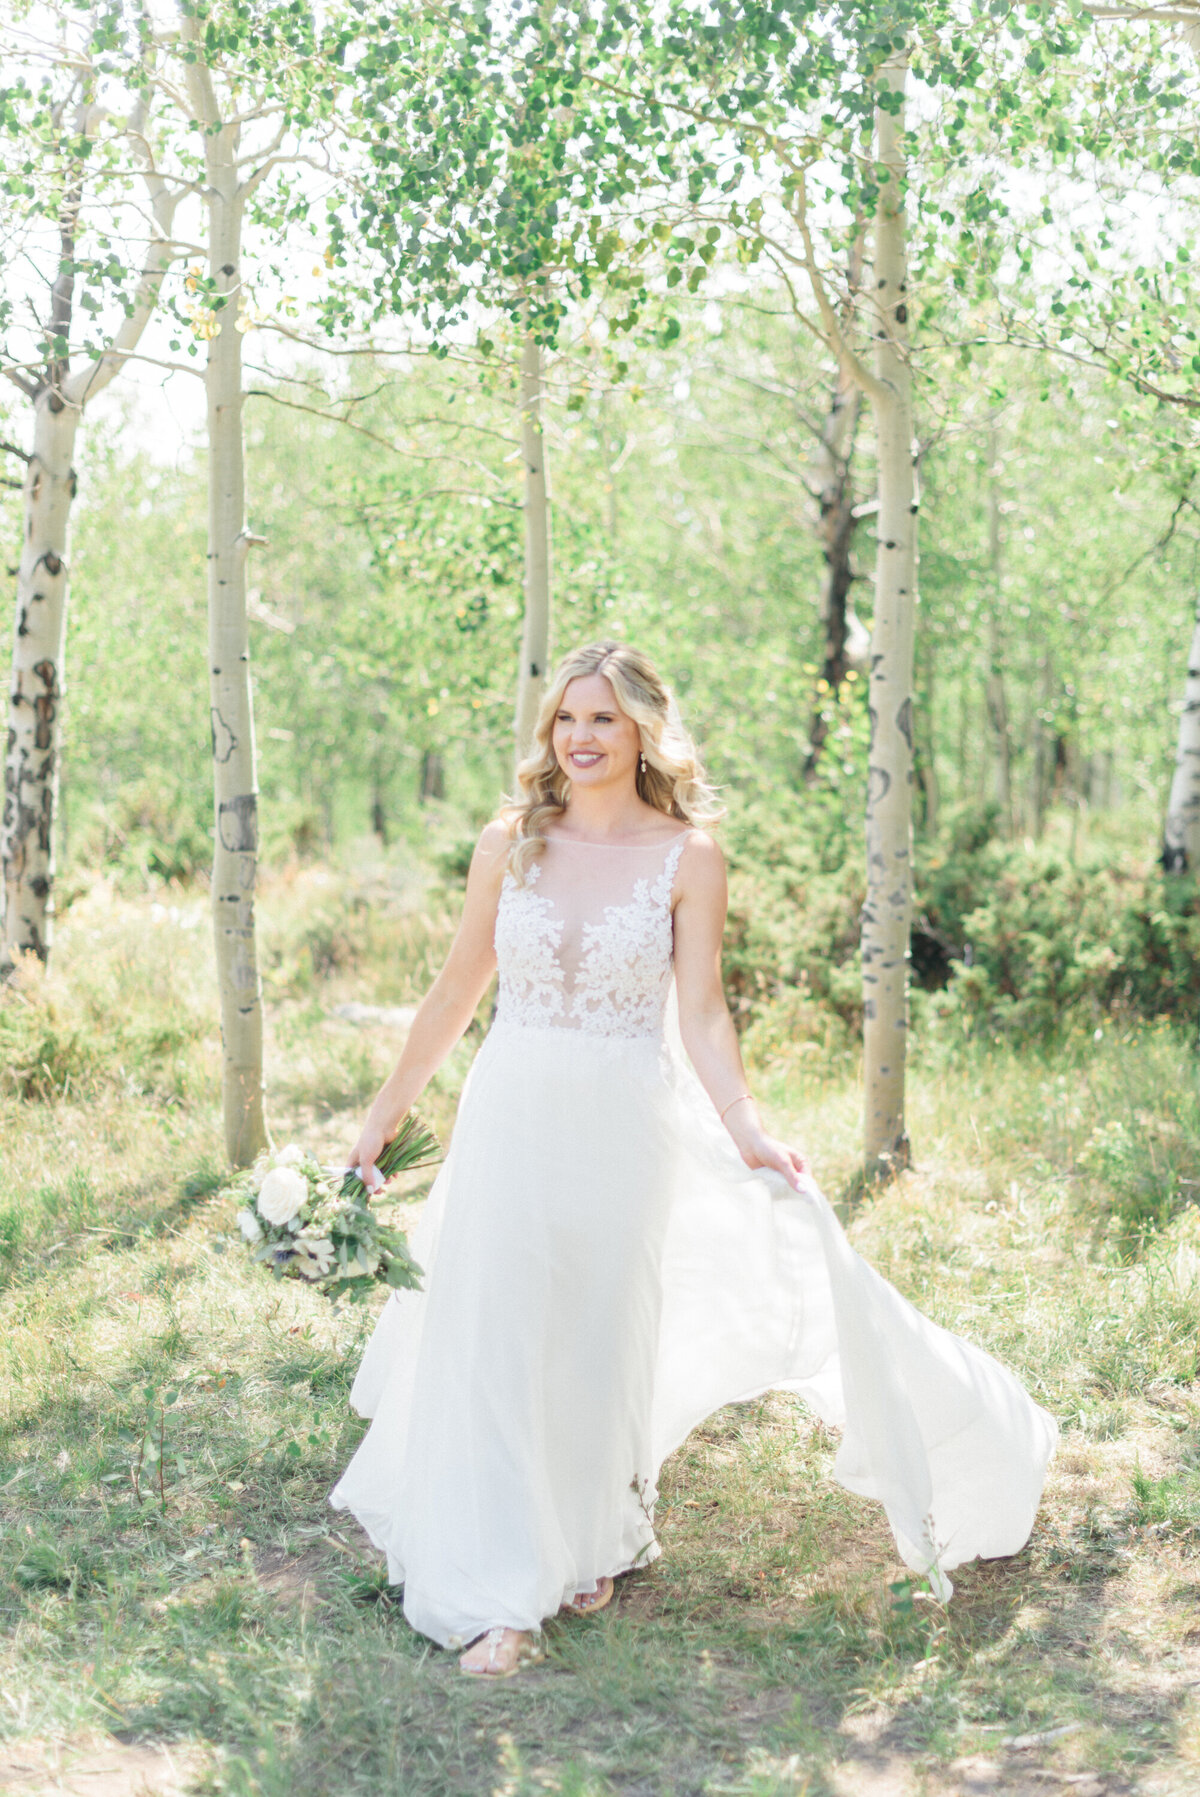 Summer Granby Wedding at the summit. Bridal portraits with aspens and beautiful florals.